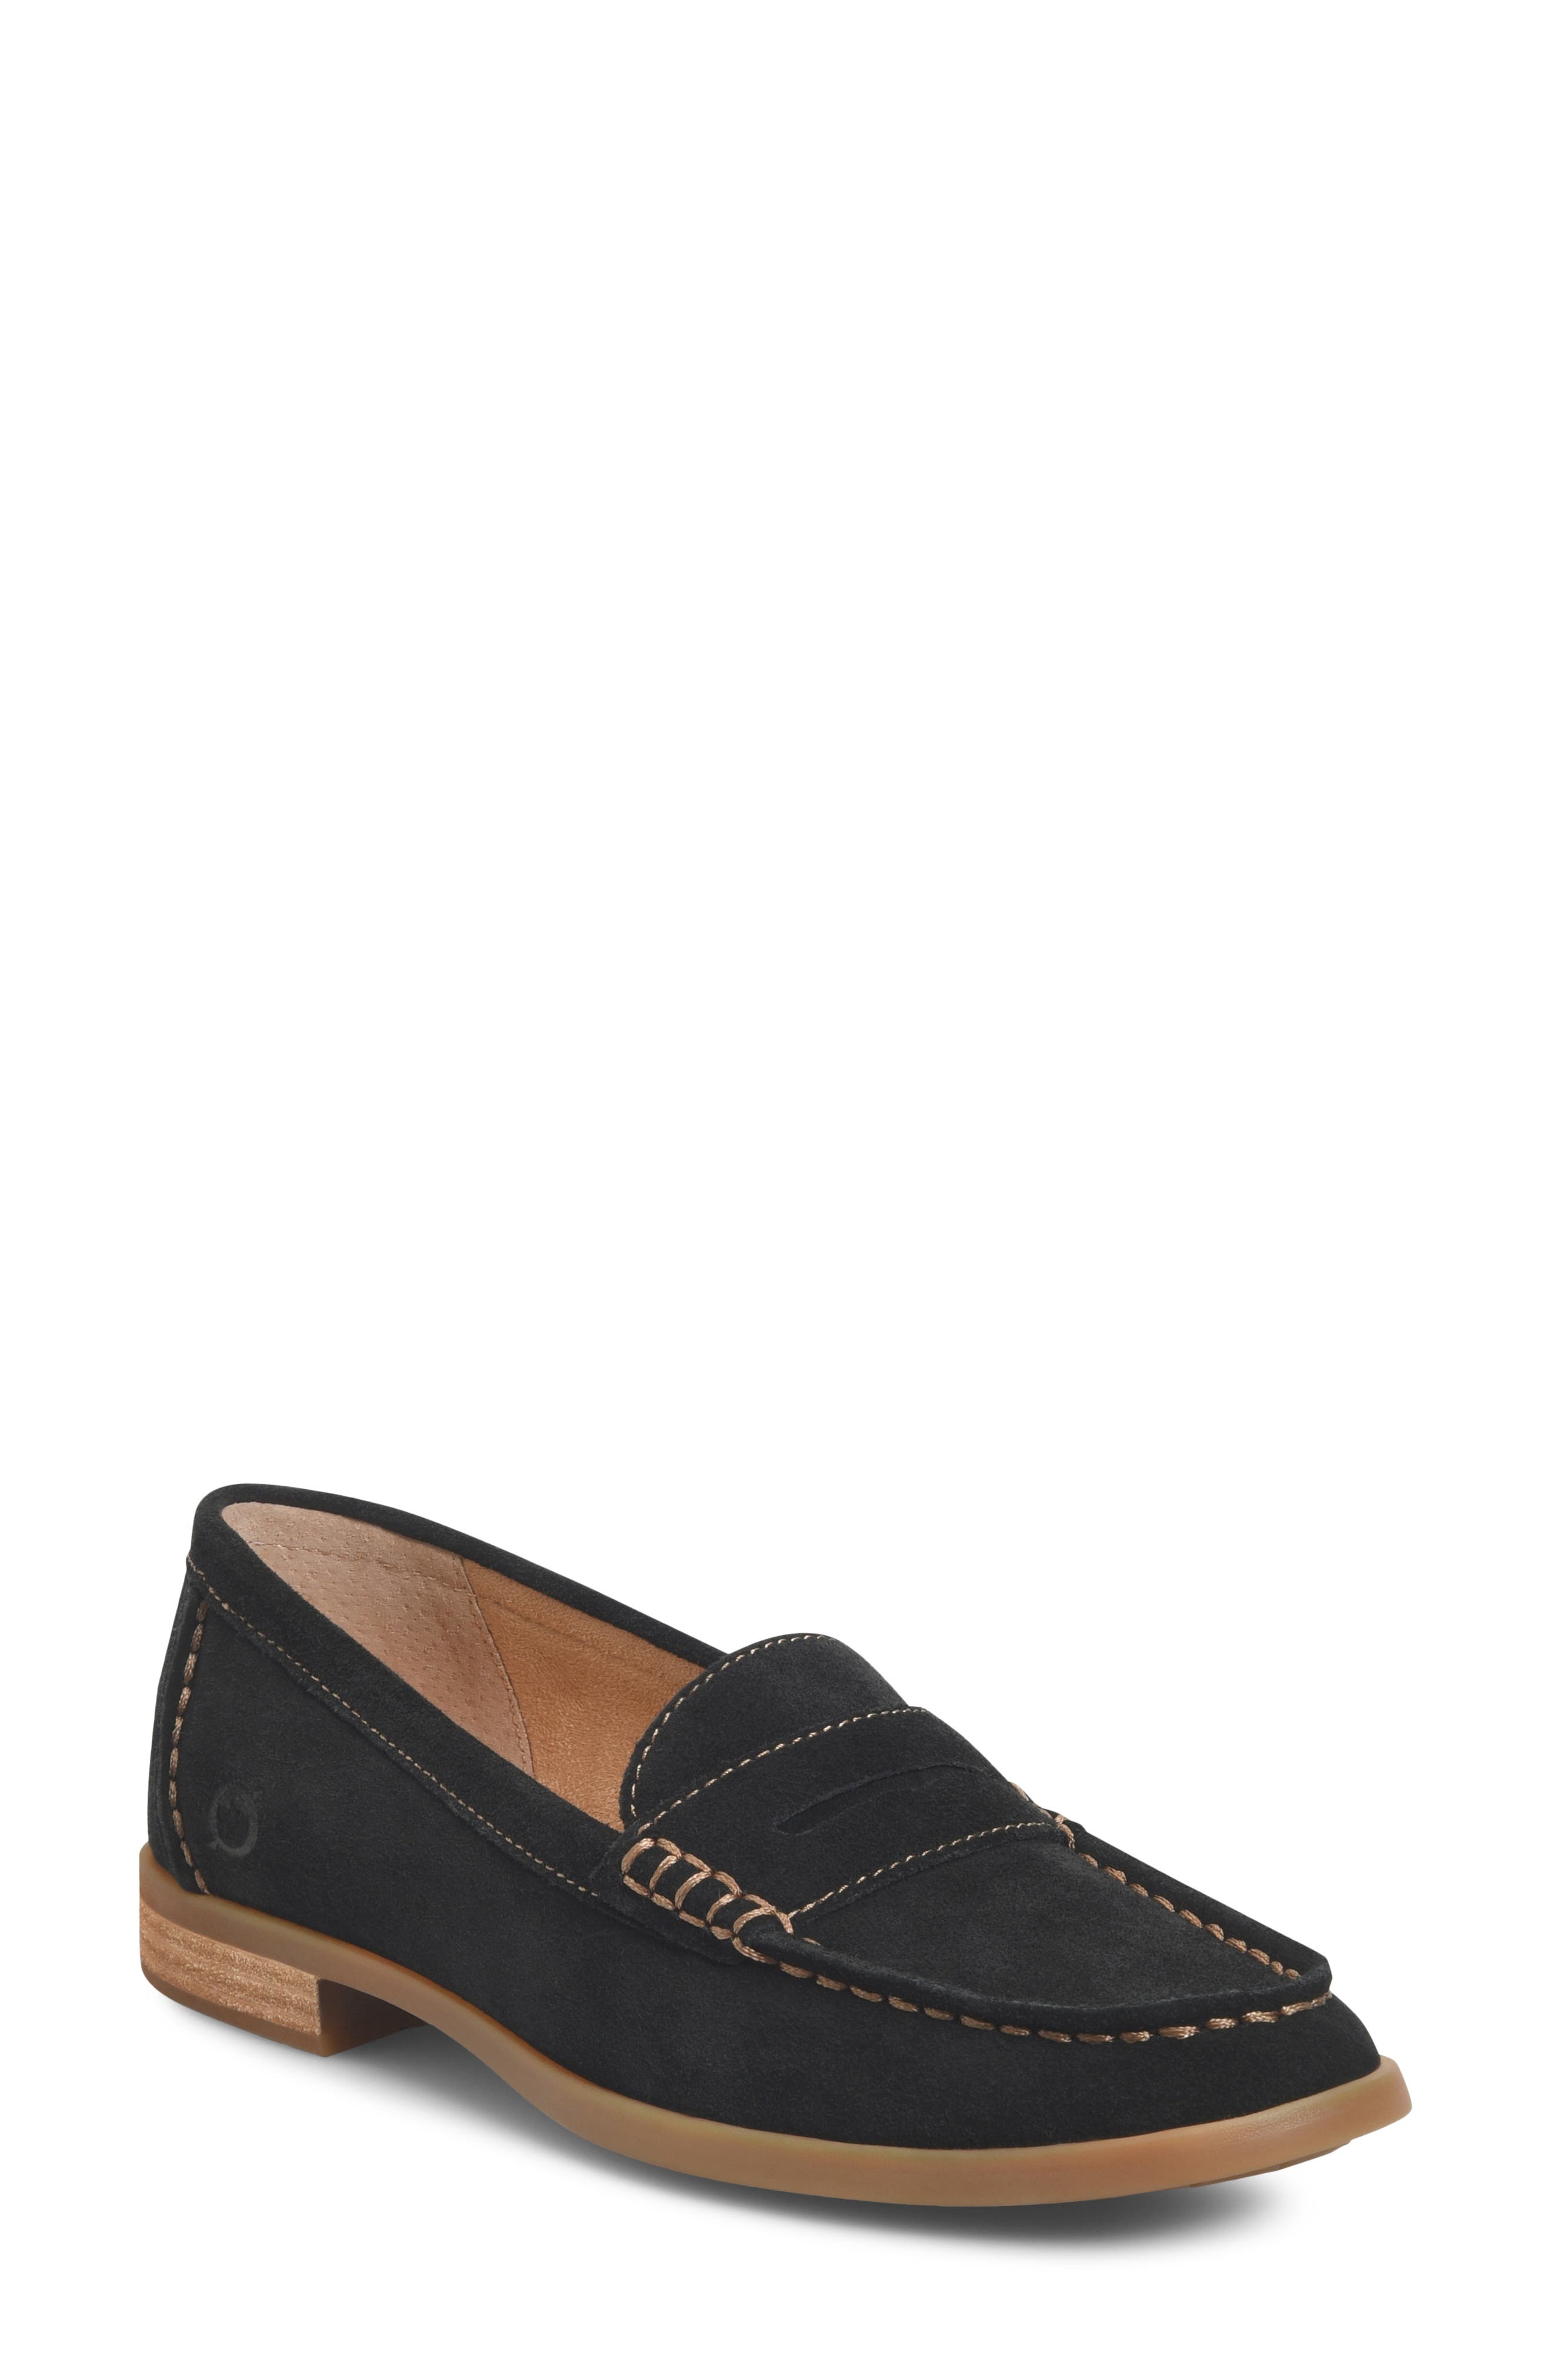 loafer shoes women